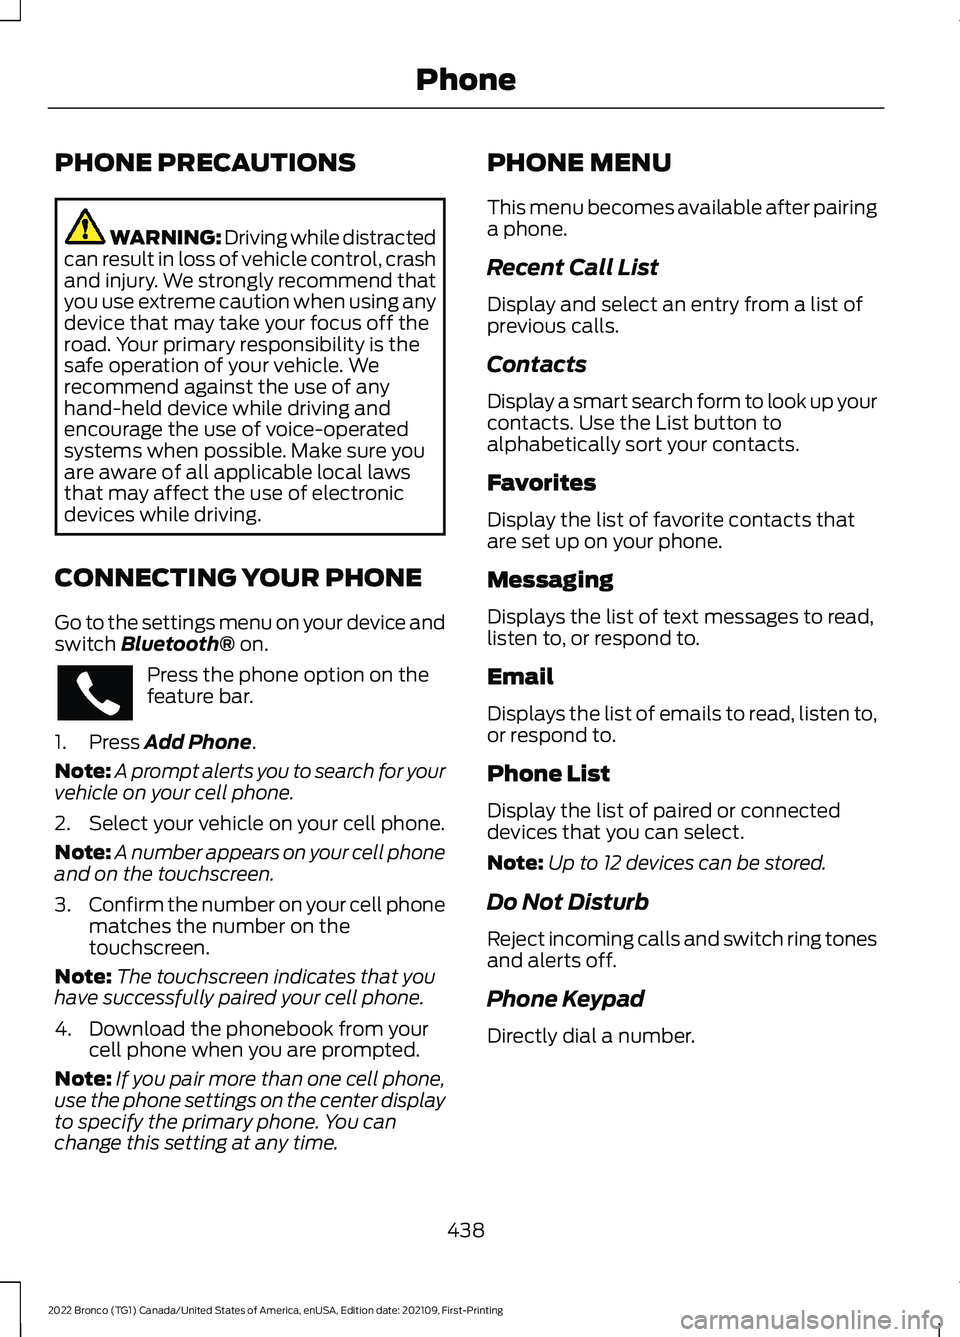 FORD BRONCO 2022 Service Manual PHONE PRECAUTIONS
WARNING: Driving while distractedcan result in loss of vehicle control, crashand injury. We strongly recommend thatyou use extreme caution when using anydevice that may take your foc